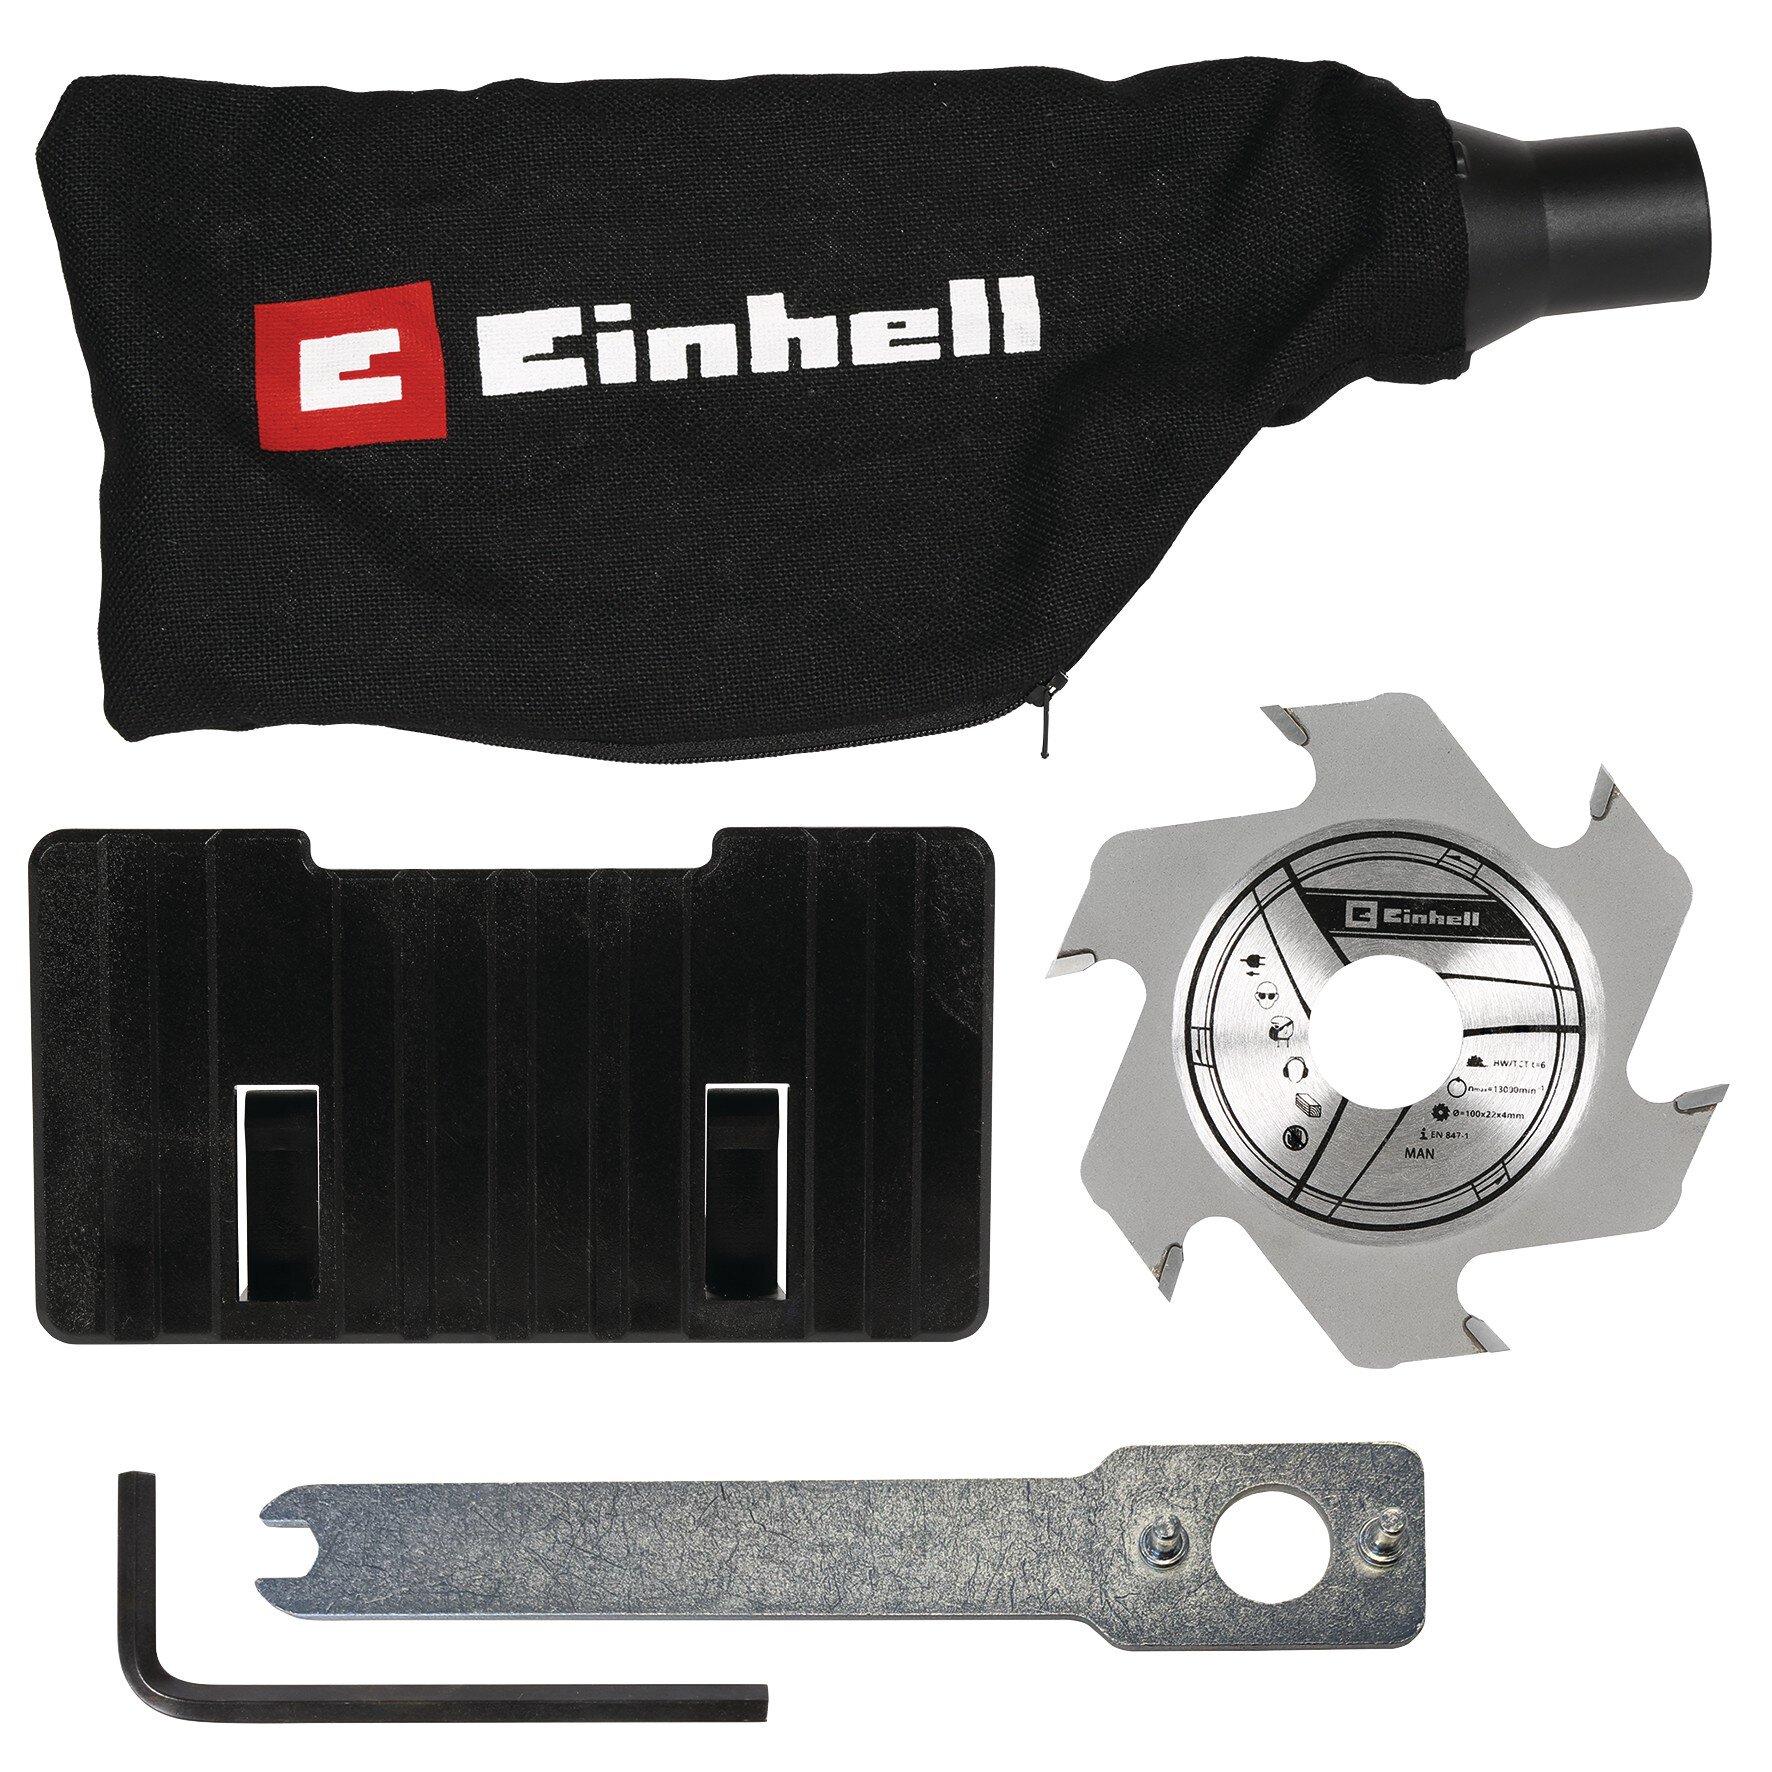 einhell-expert-cordless-biscuit-jointer-4350630-accessory-001